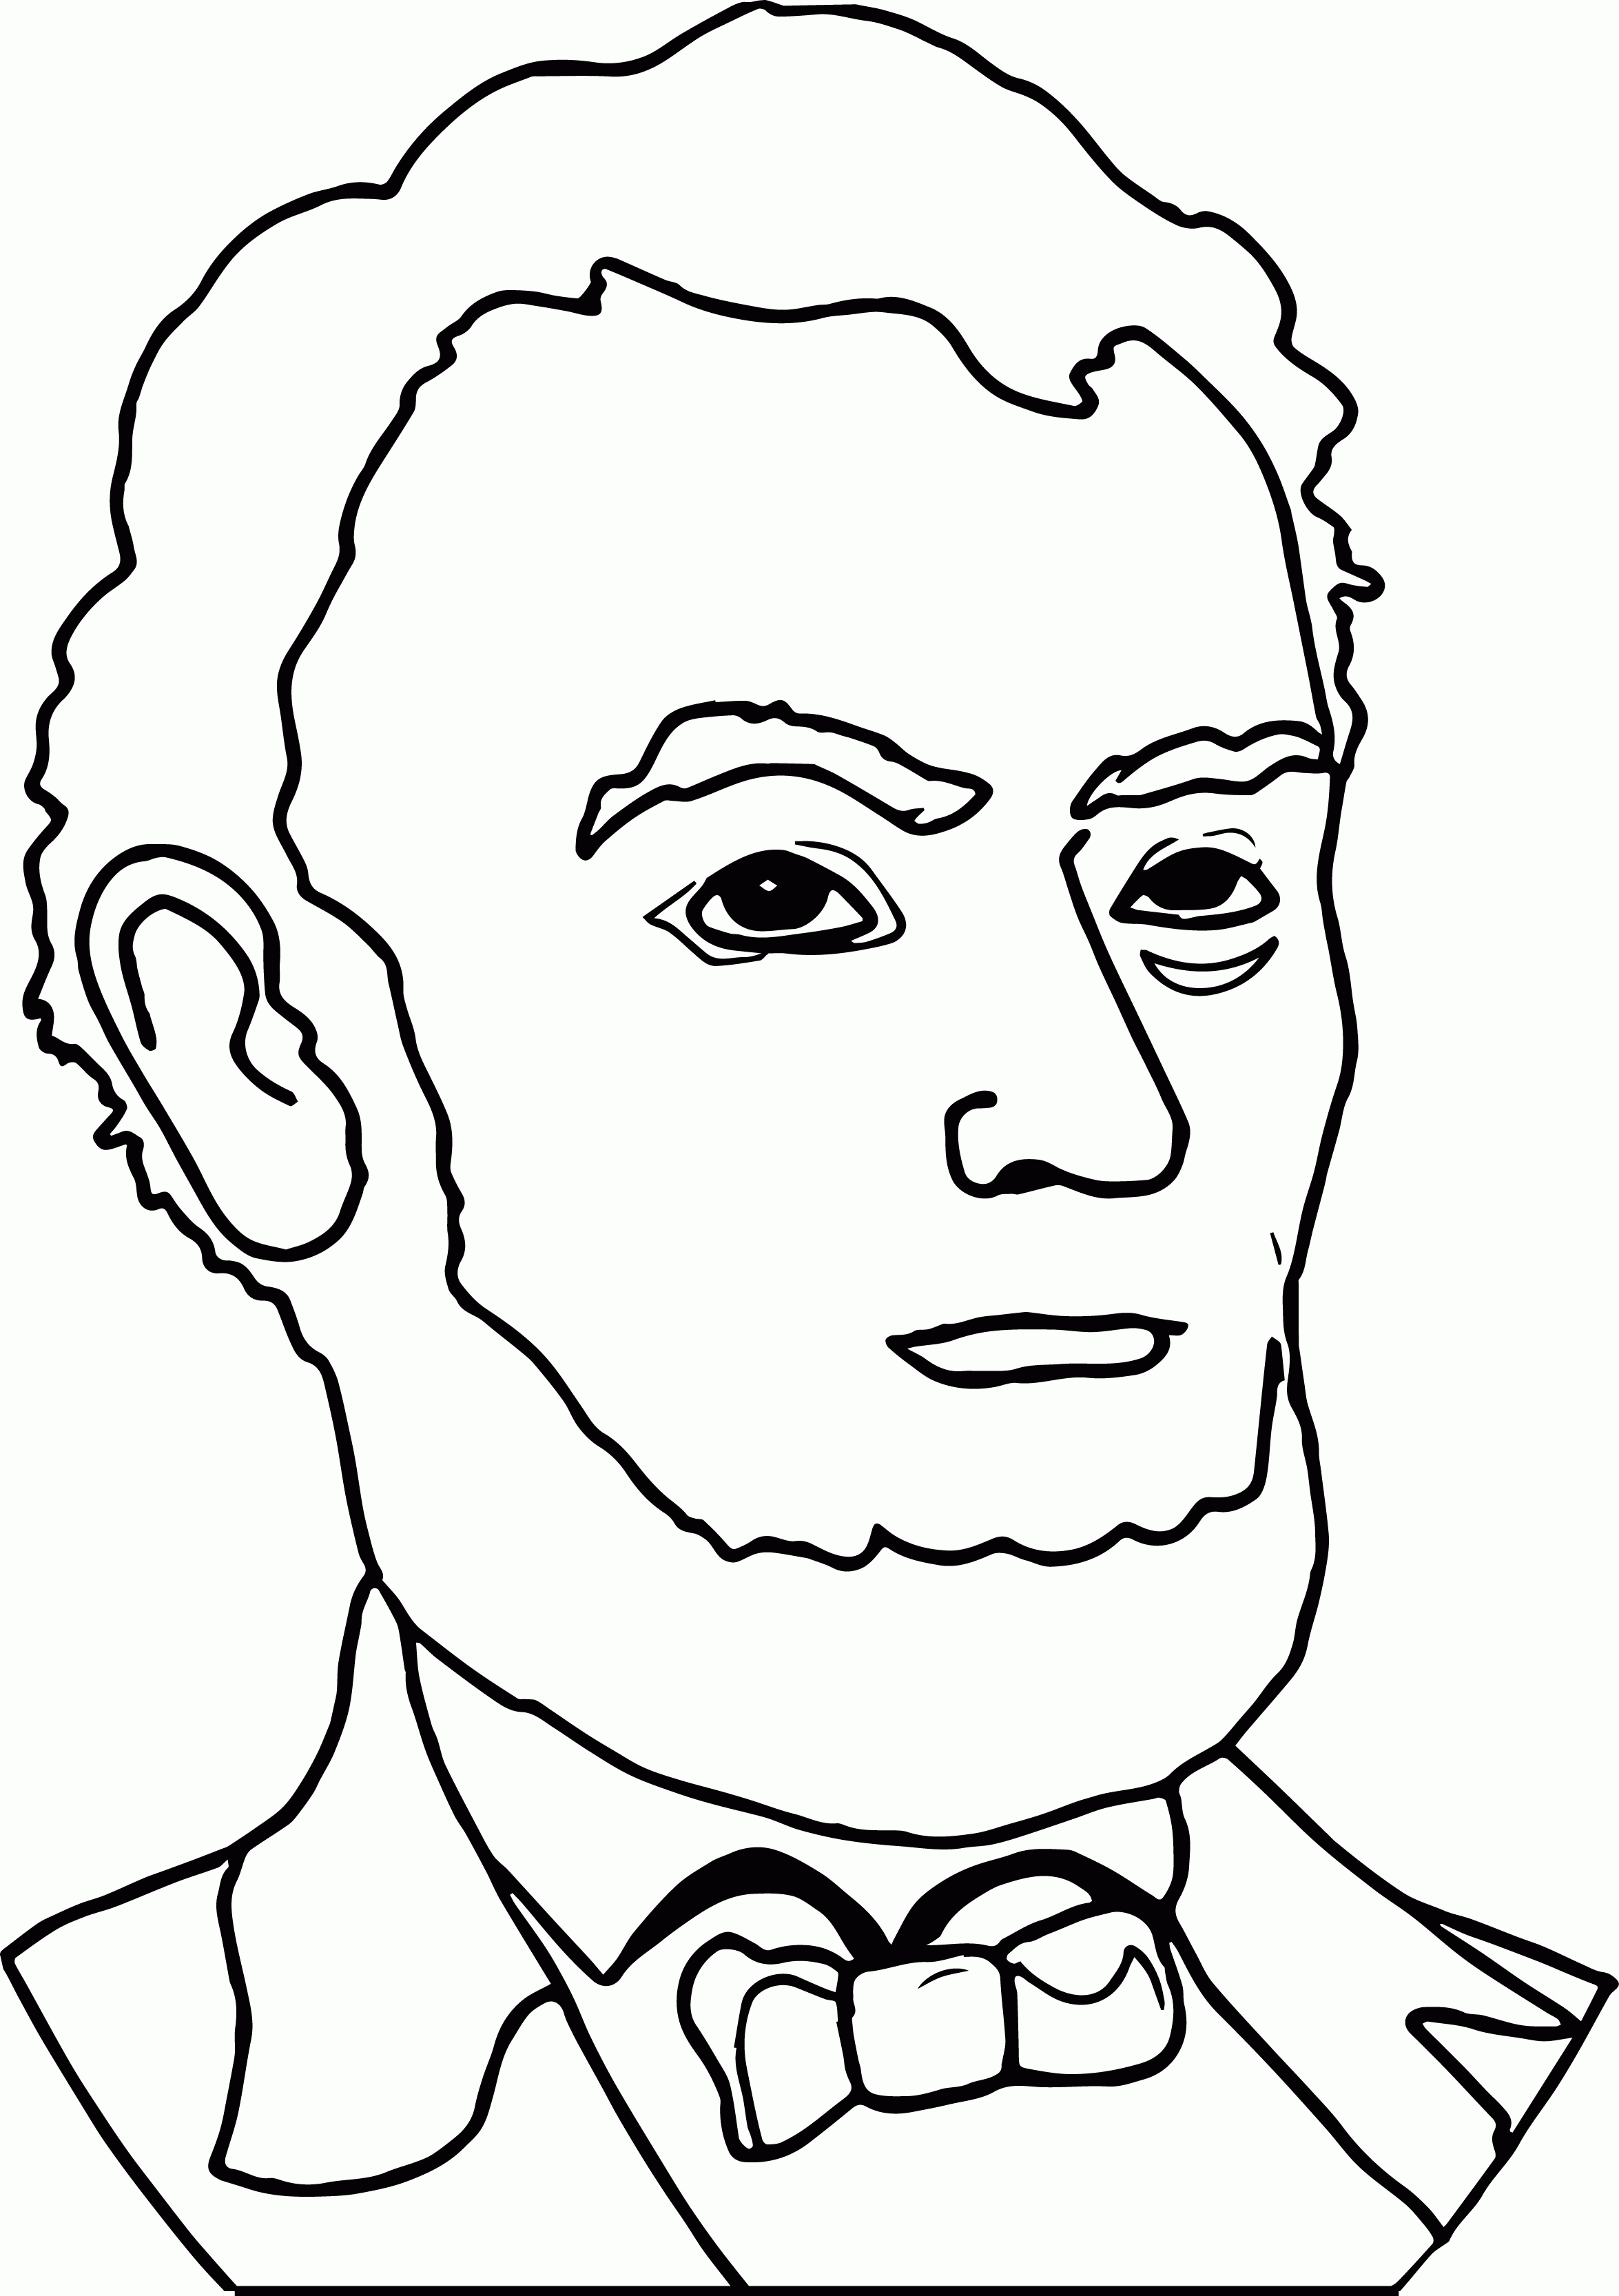 Abraham Lincoln Coloring Pages Free - Food Ideas